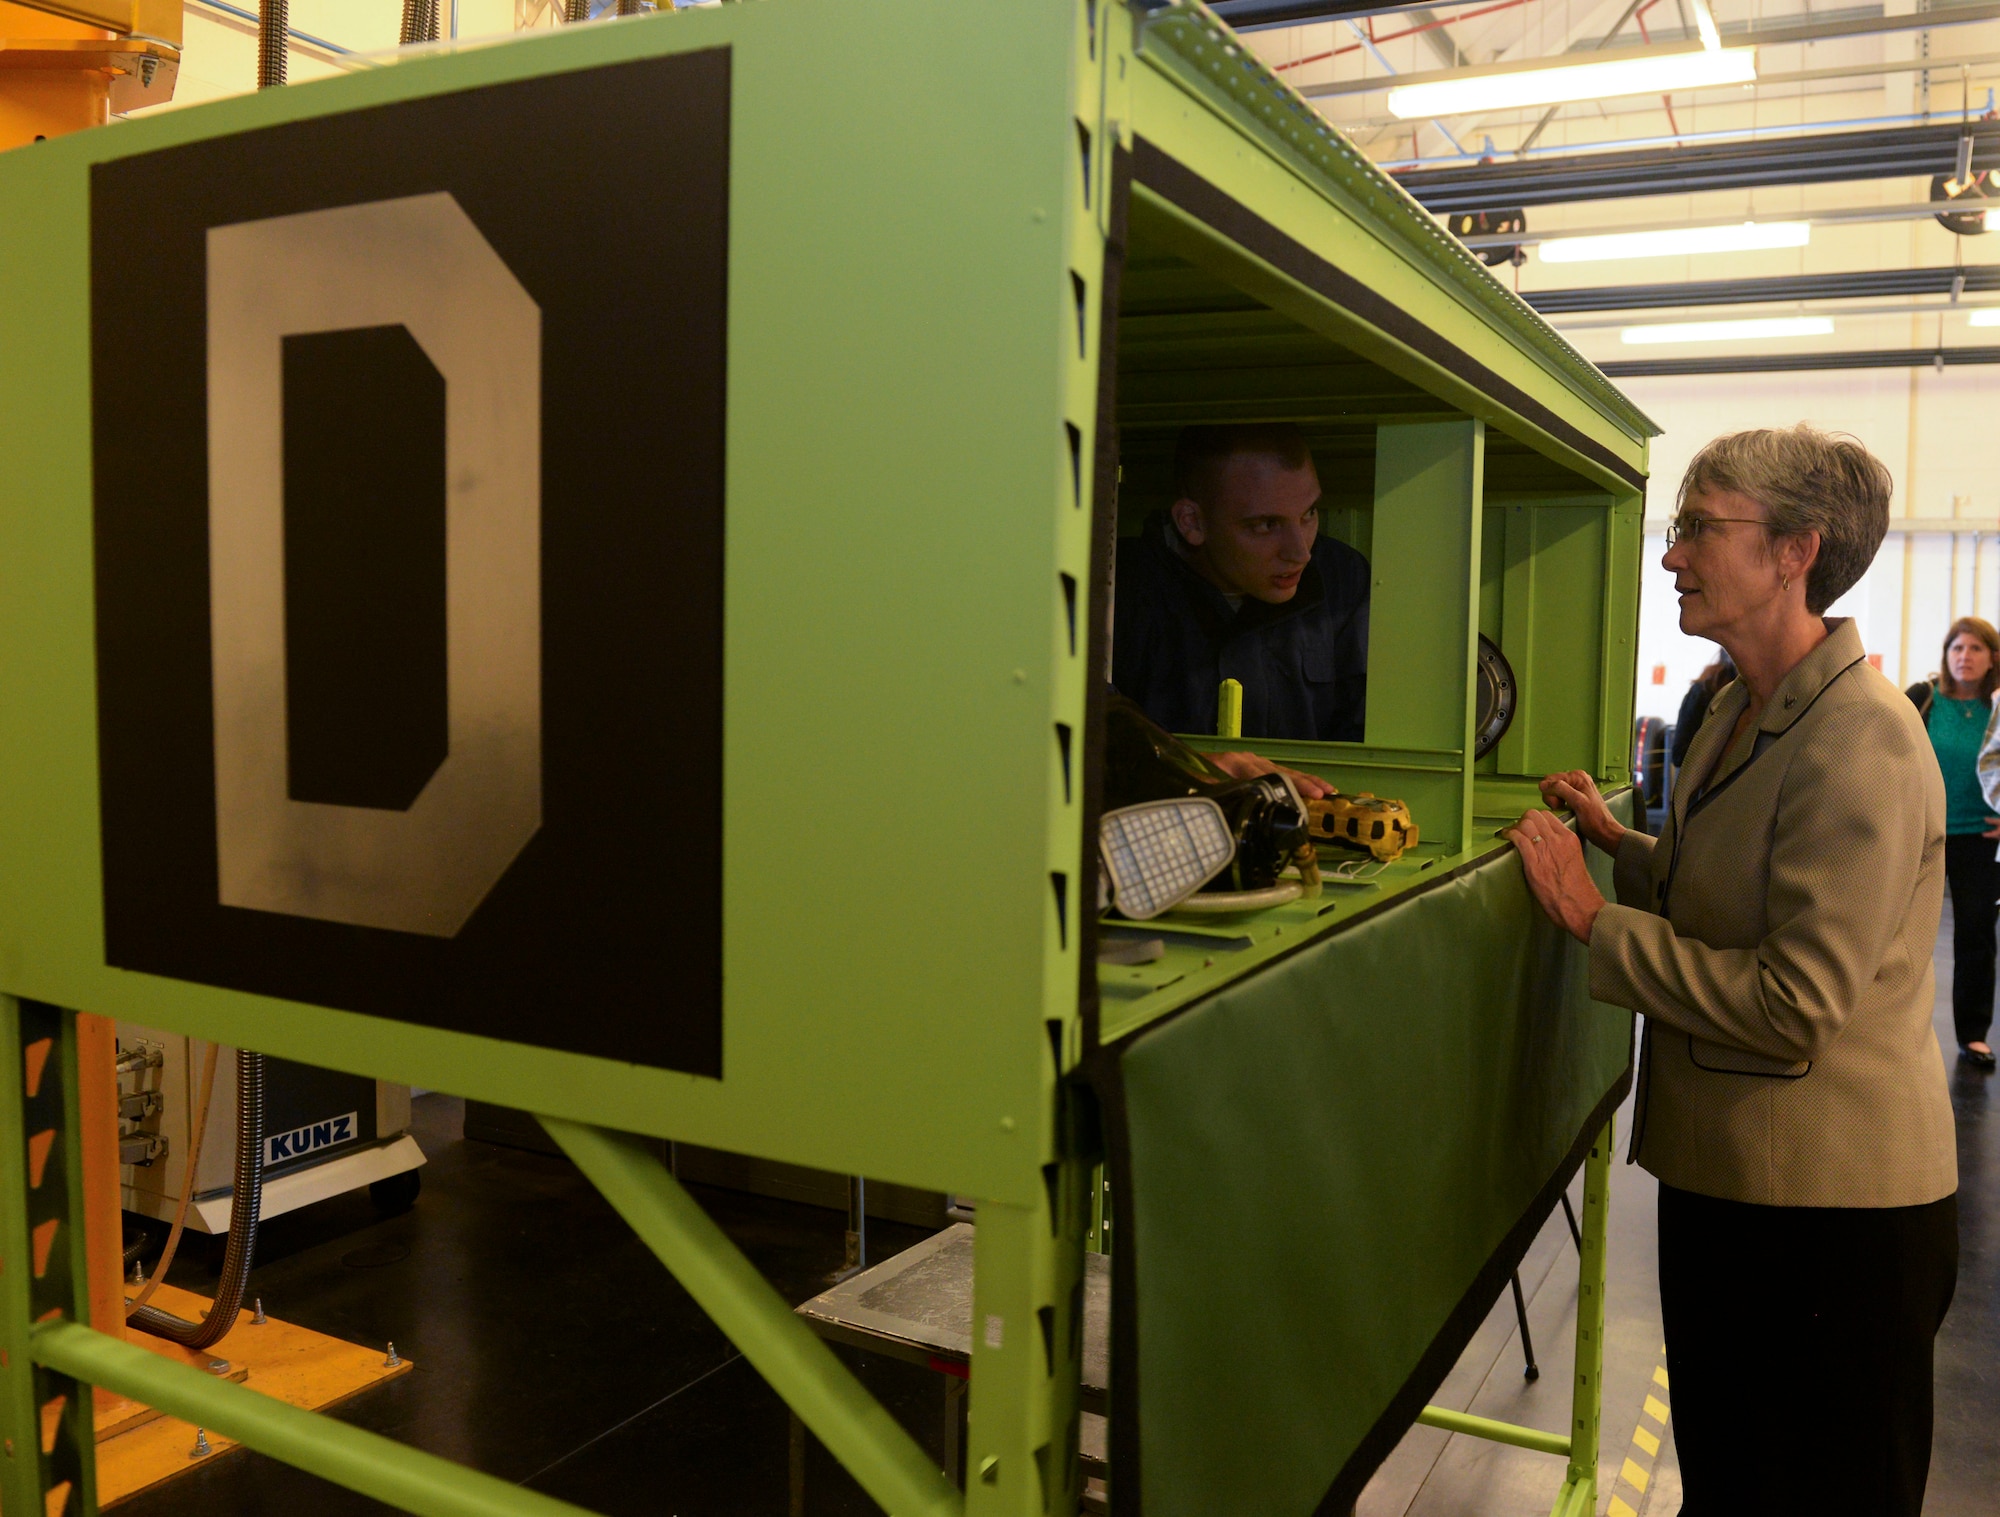 U.S. Air Force Senior Airman Patrick Leach, 100th Maintenance Squadron aircraft fuels system journeyman and Secretary of the Air Force Heather Wilson discuss the confined space trainer, a new innovation developed by the squadron at RAF Mildenhall, England, July 12, 2018. Secretary Wilson visited RAF Mildenhall to engage with Airmen from the 100th ARW and discuss innovations and strategy. (U.S. Air Force photo by Airman 1st Class Alexandria Lee)